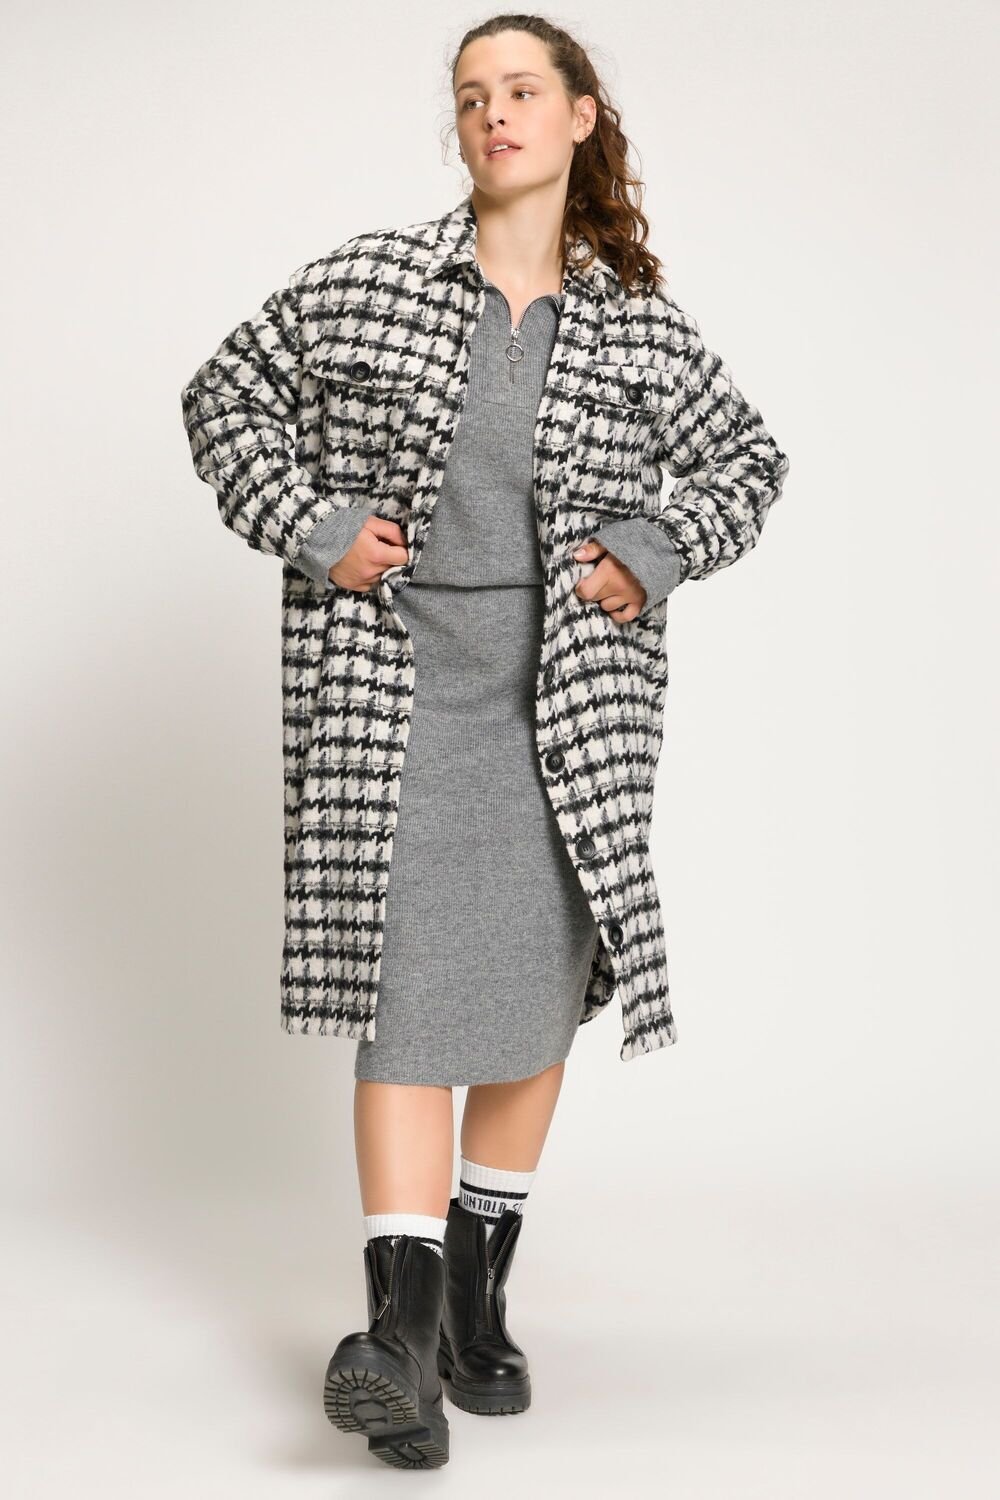 Houndstooth Print Plus size Shirt Jacket - Curvy Chic Boutique